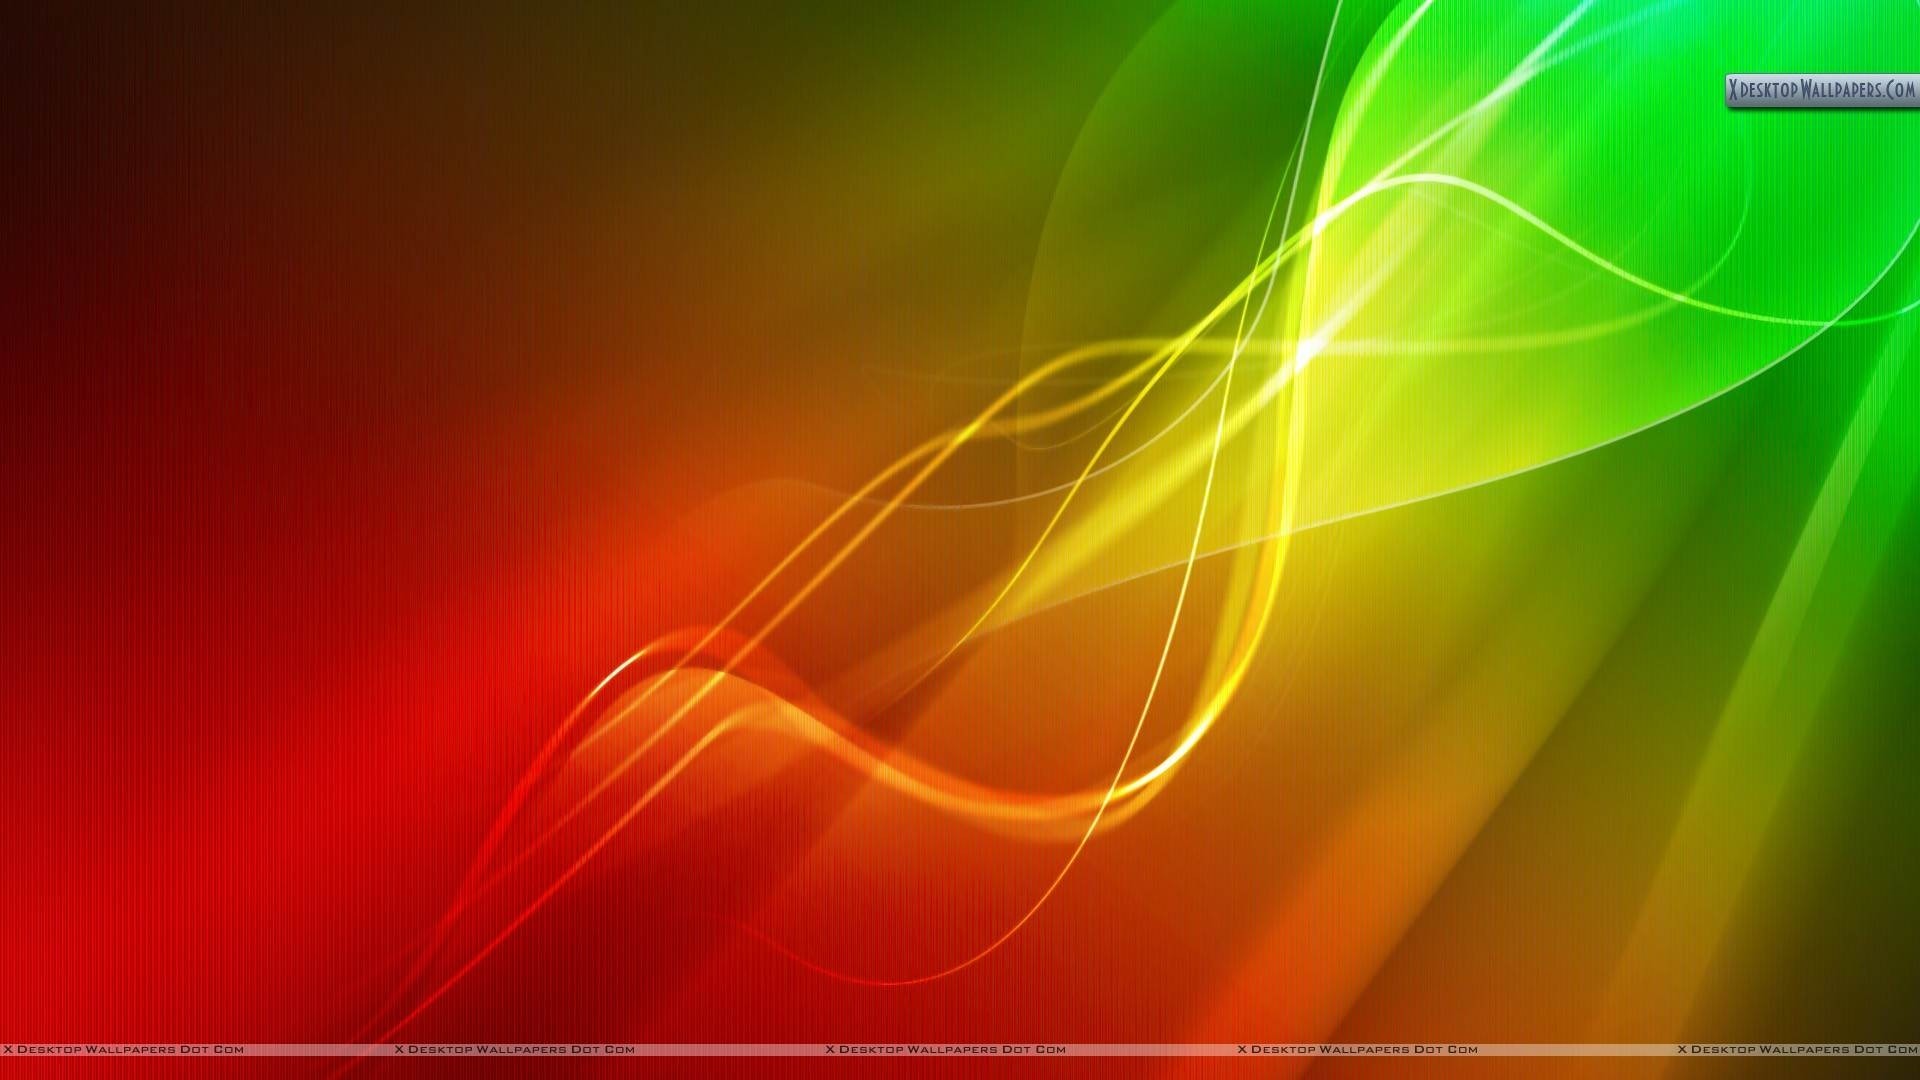 1920x1080 Wallpapers Backgrounds - Black abstract green lights red wallpaper desktop  white